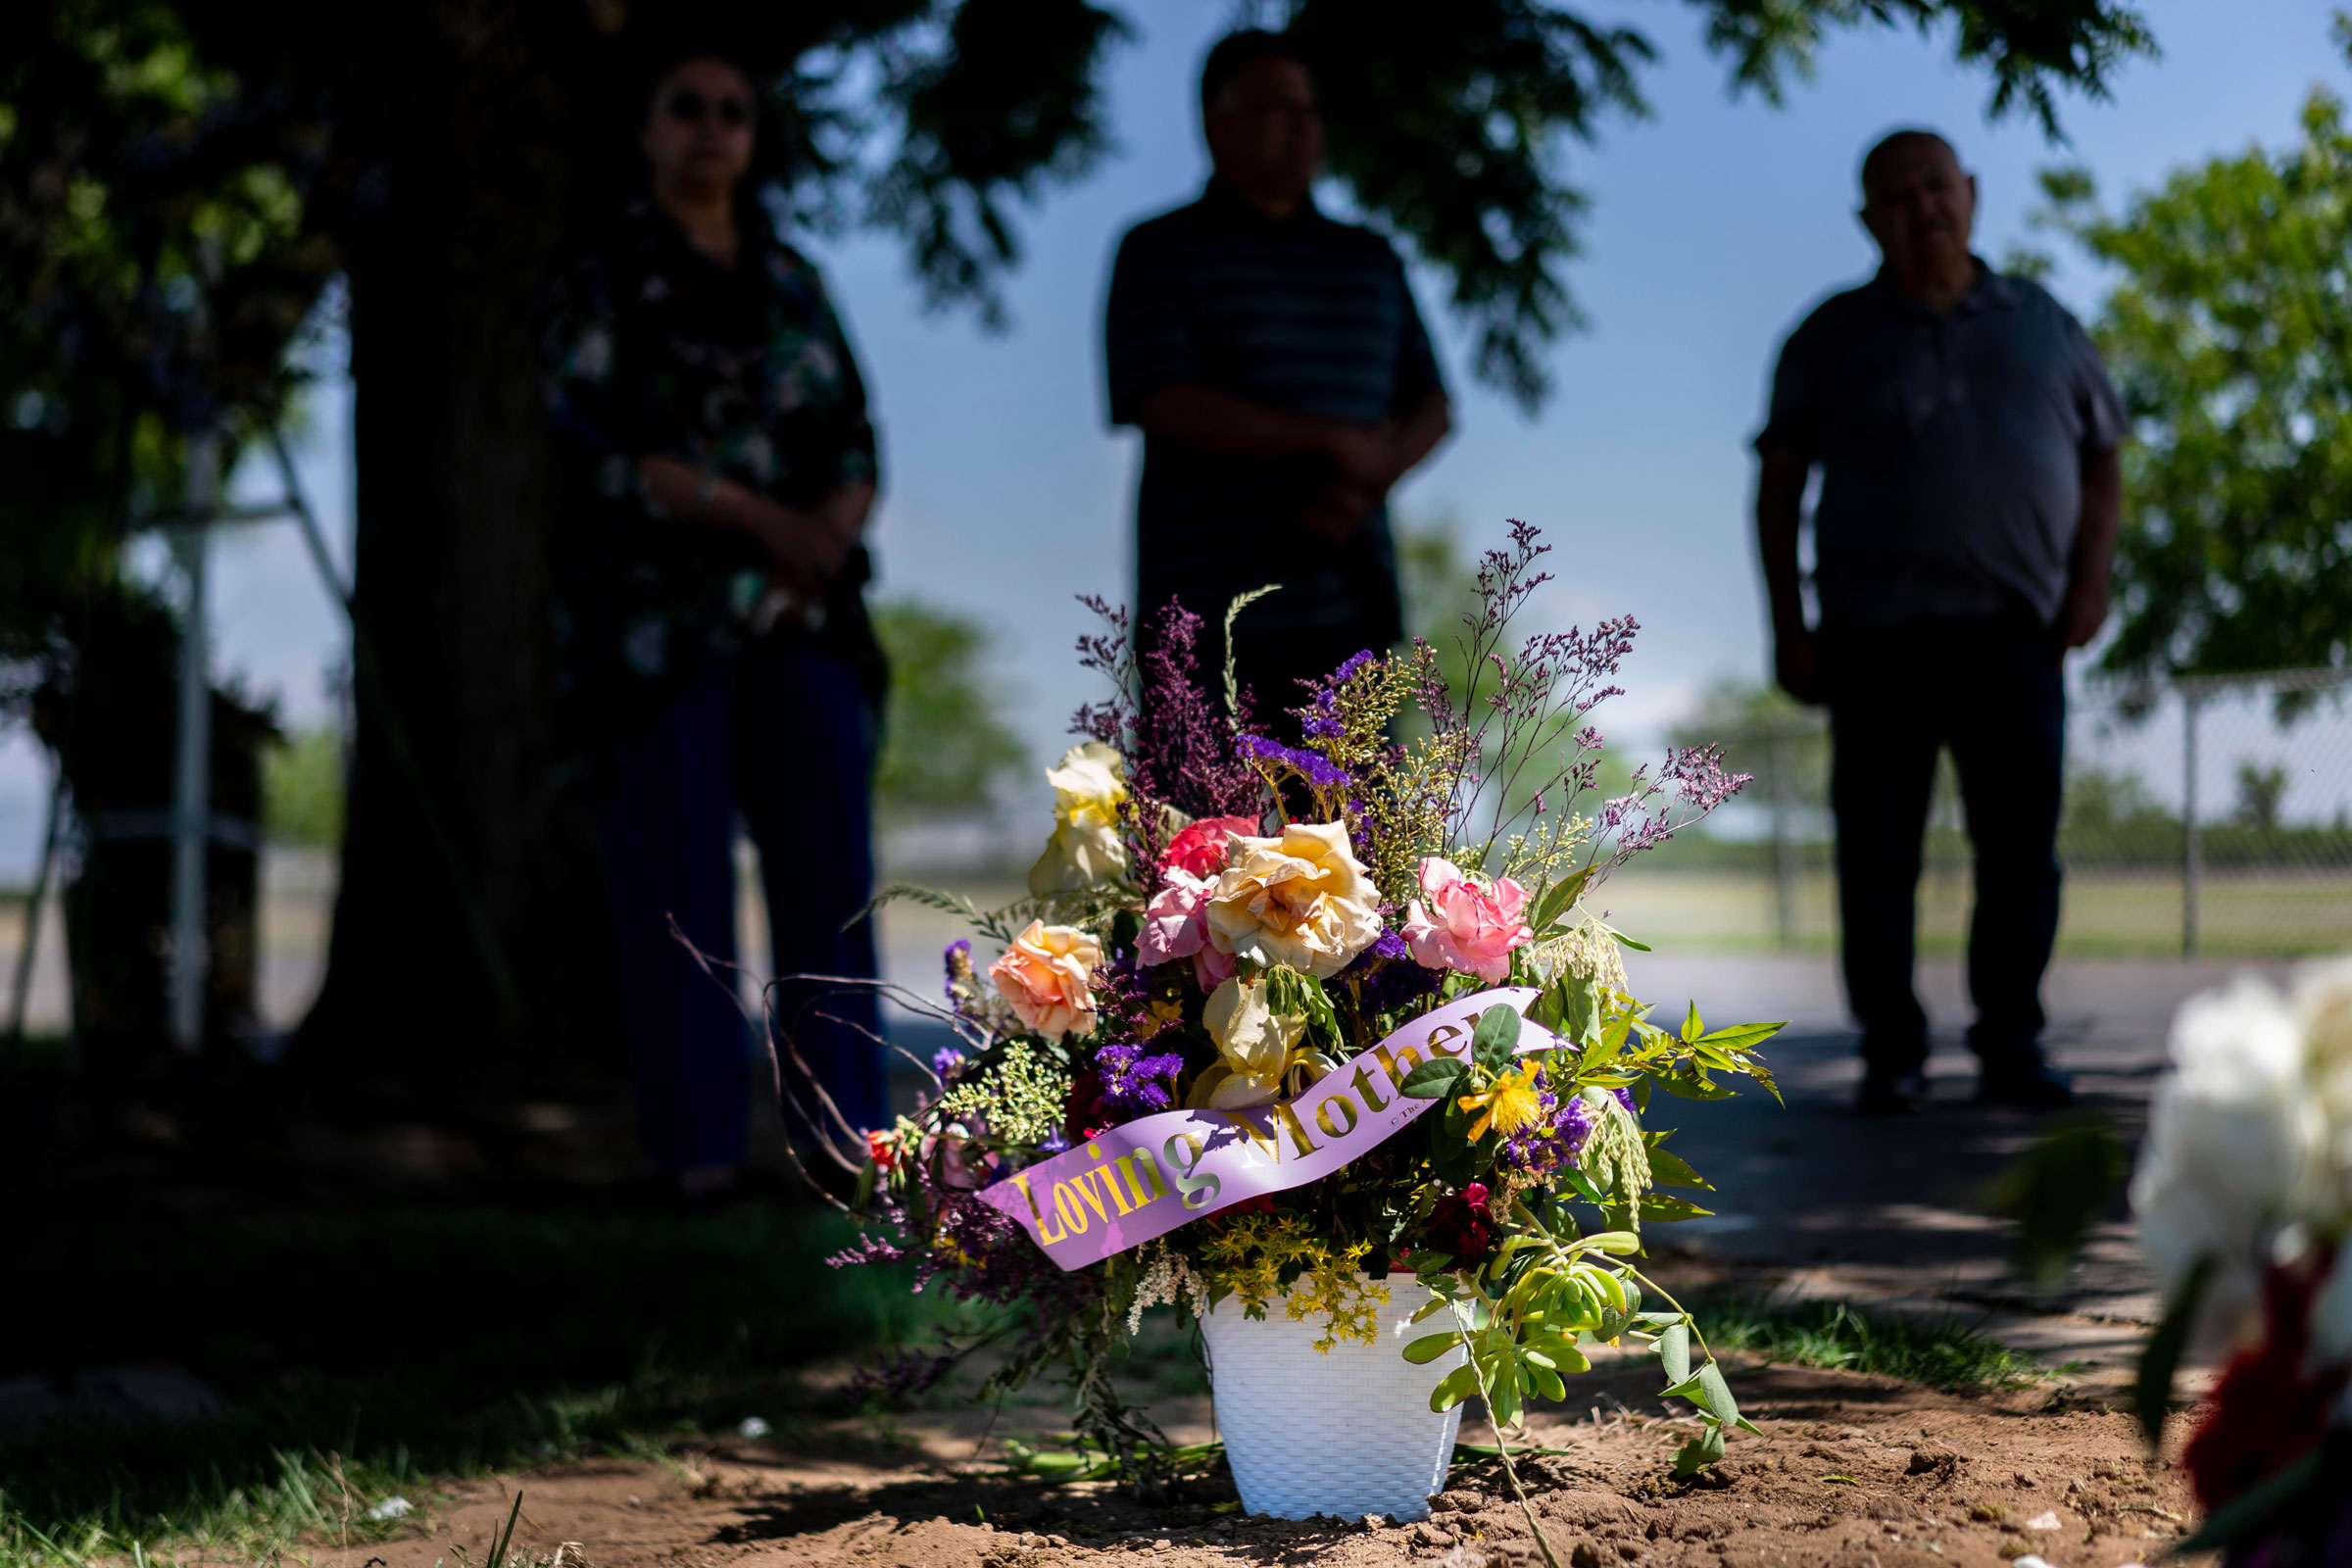 A family mourning a mother’s death from COVID-19 at a grave site at Smith Mountain Cemetery in Dinuba, California, on Sunday May 3, 2020. (Melina Mara—The Washington Post/Getty Images)